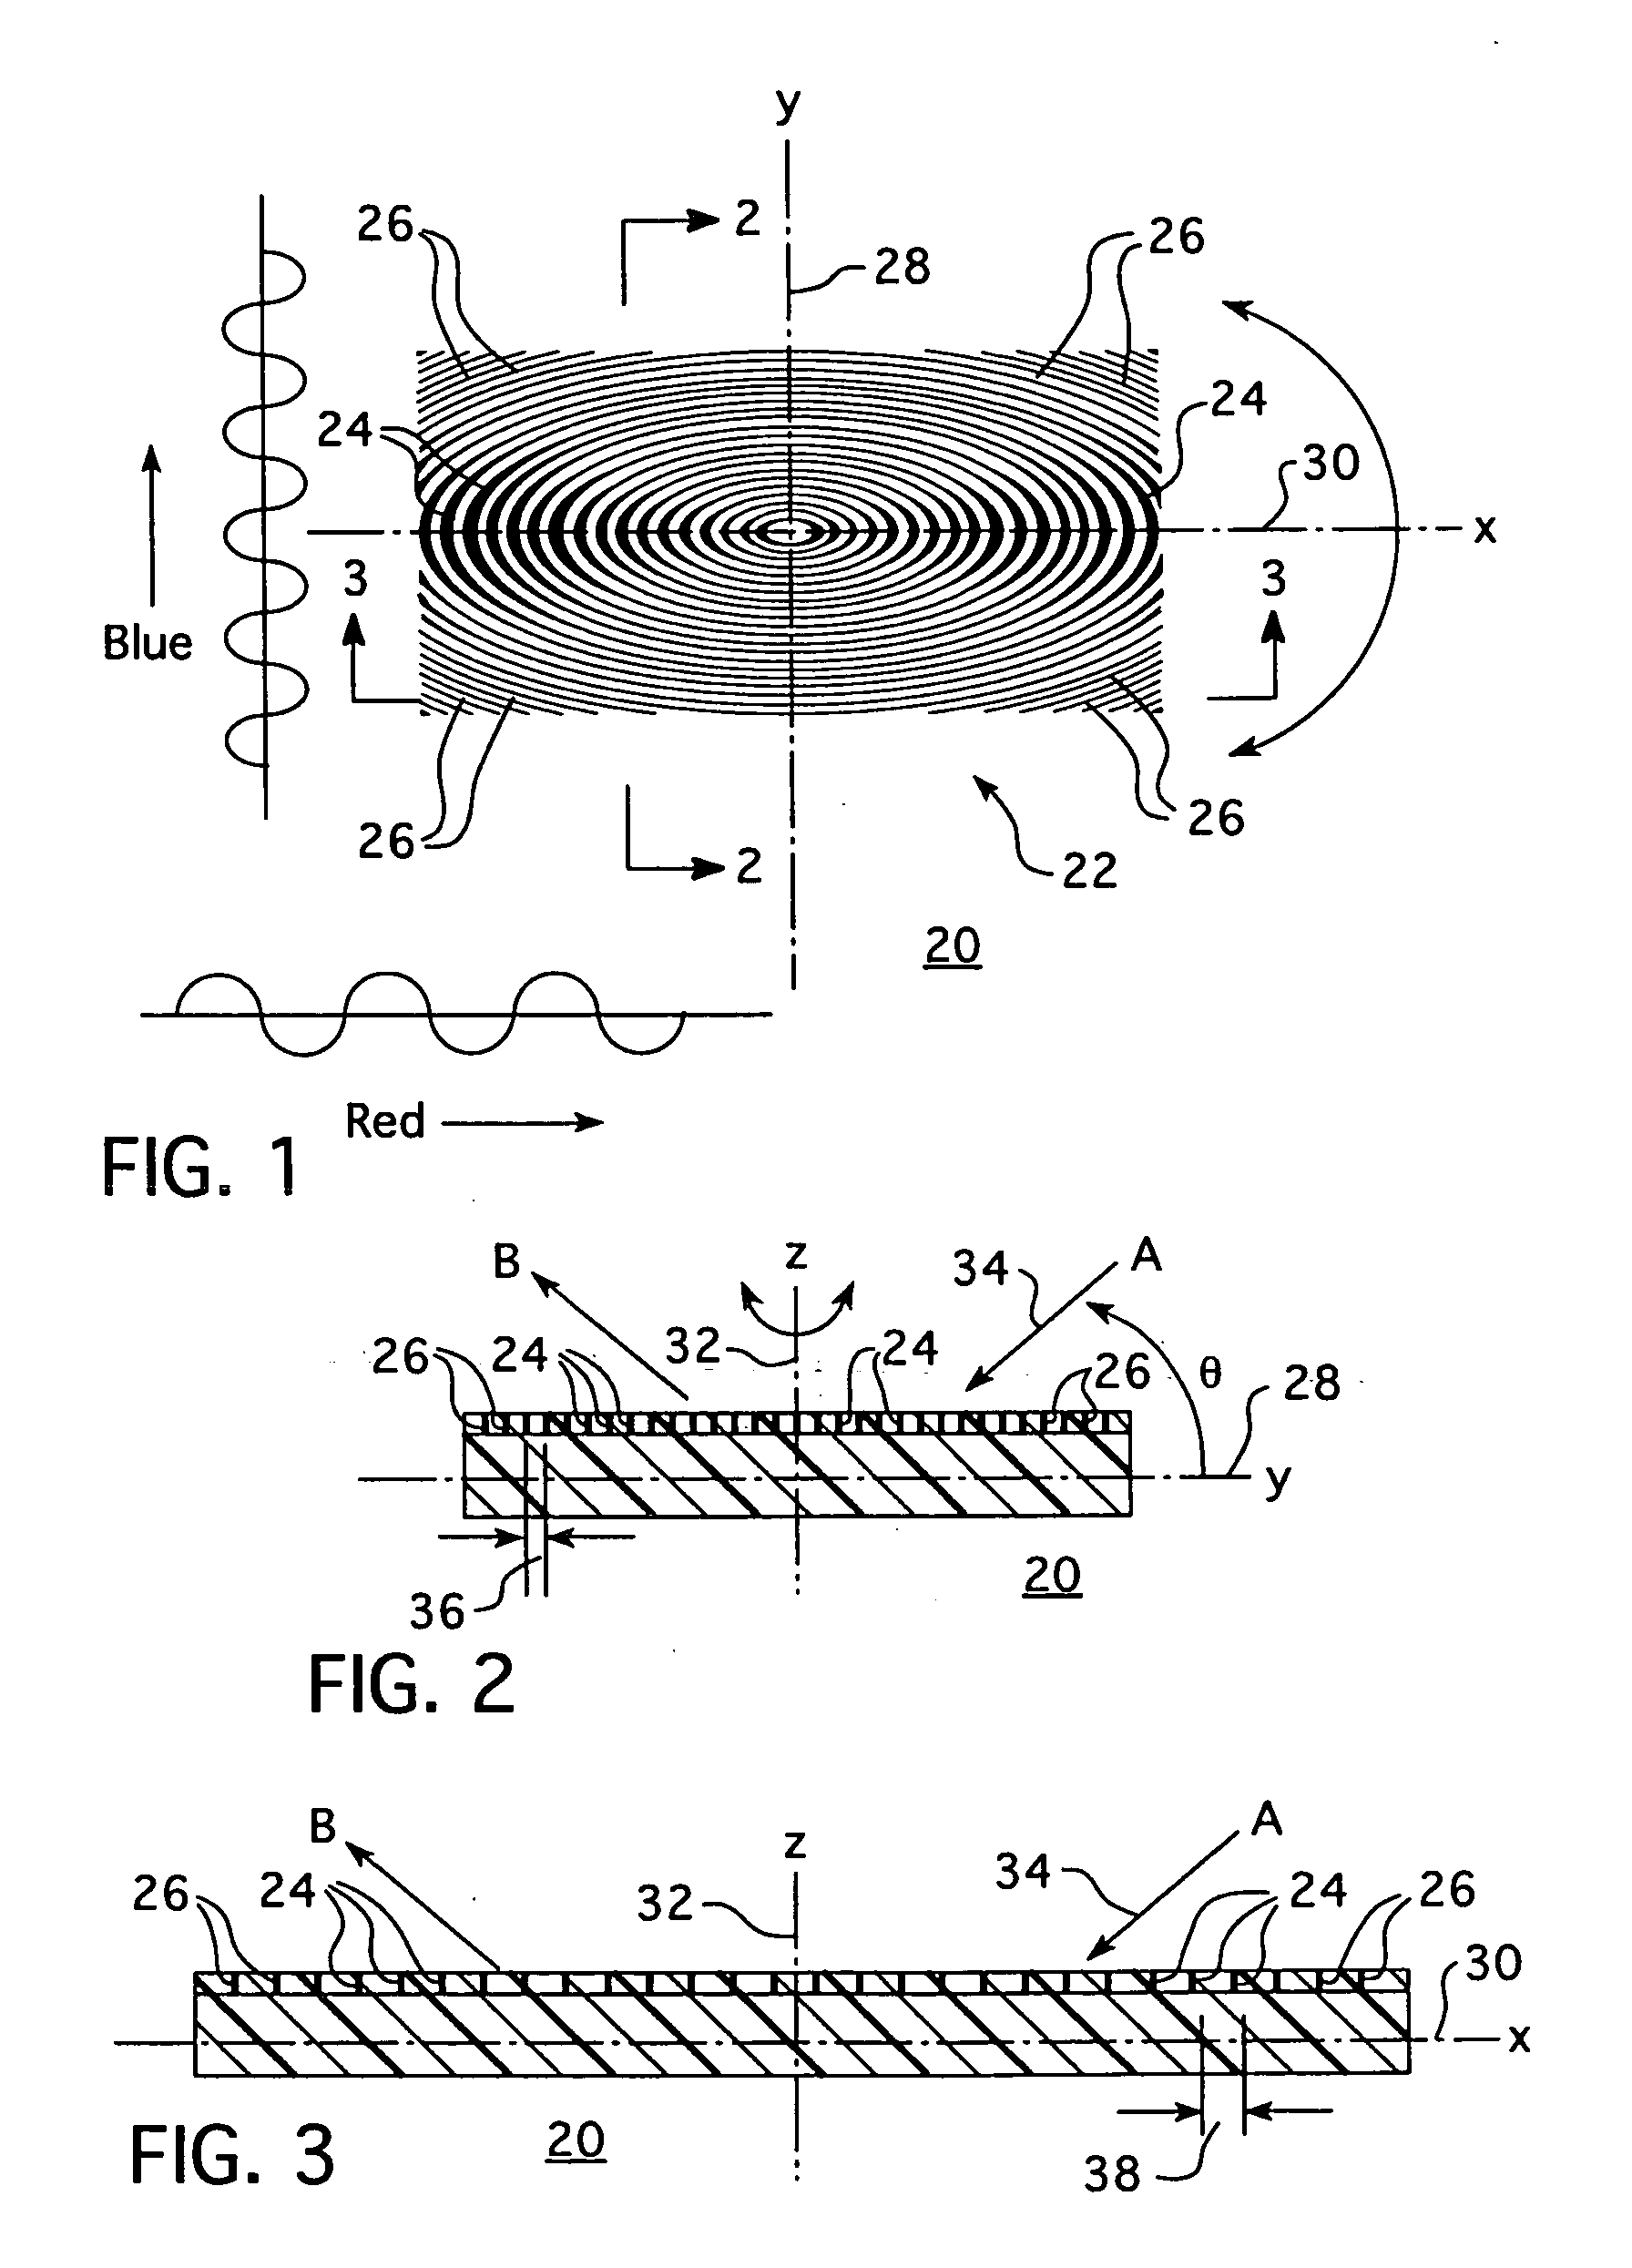 Diffraction-based optical grating structure and method of creating the same